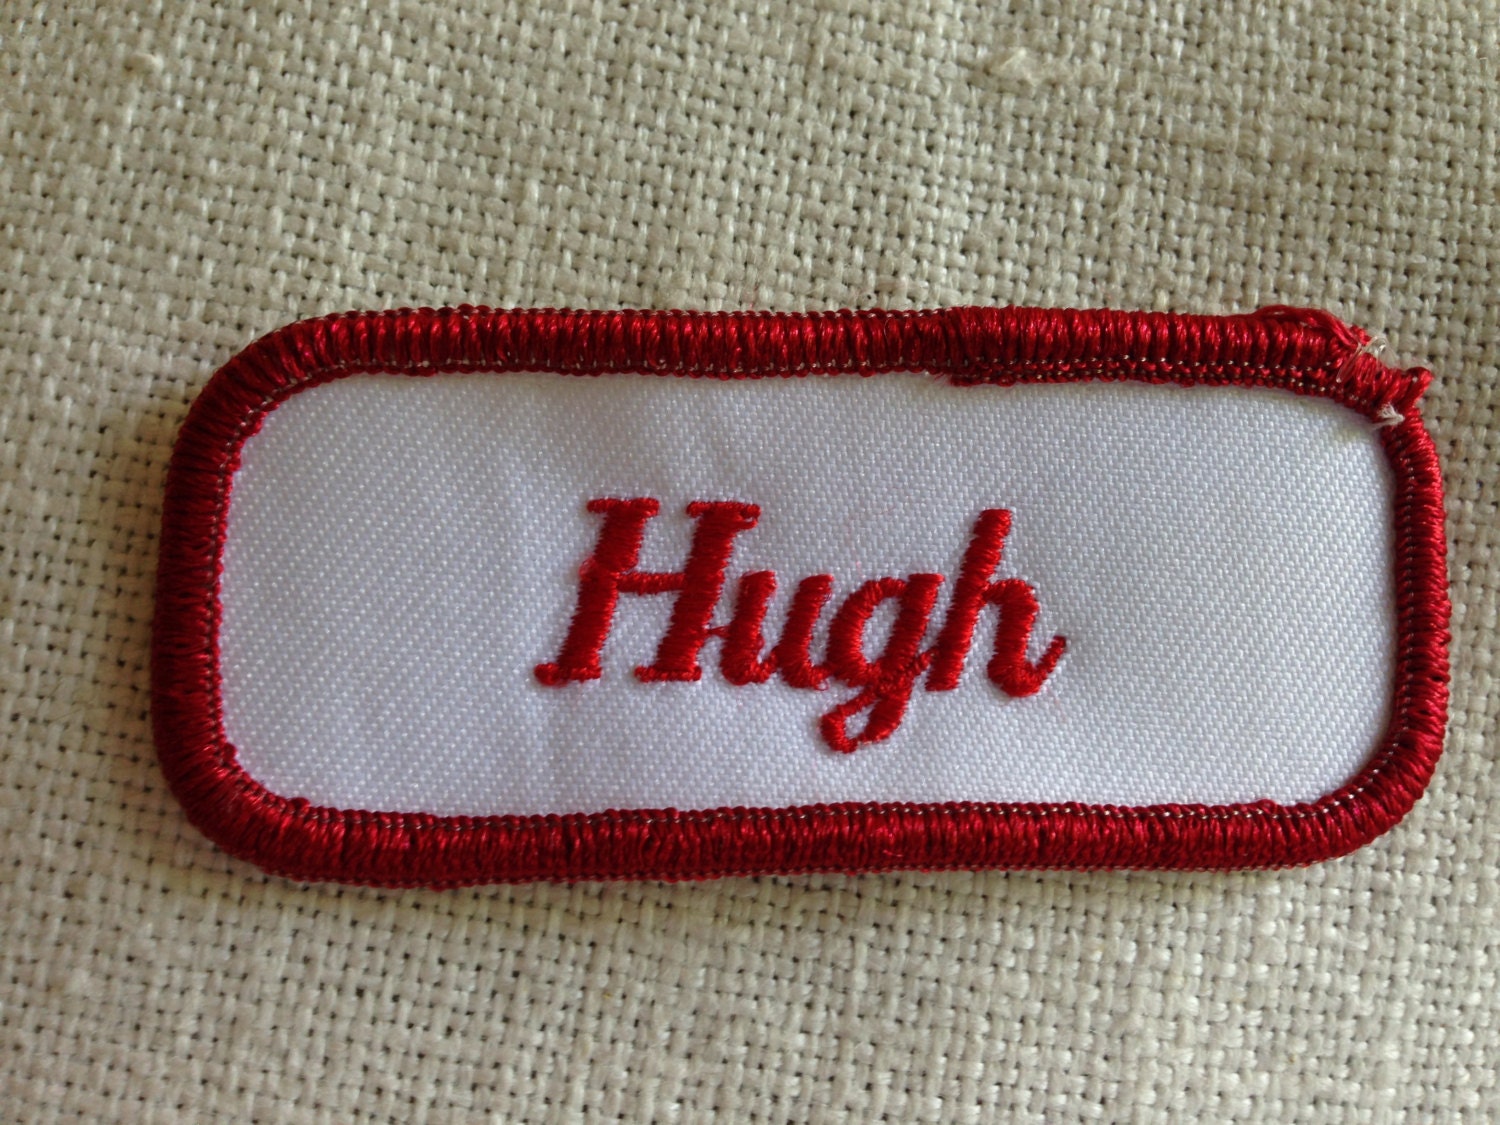  Name Patch Uniform Work Shirt Personalized Embroidered White  with Red Border. Iron on.